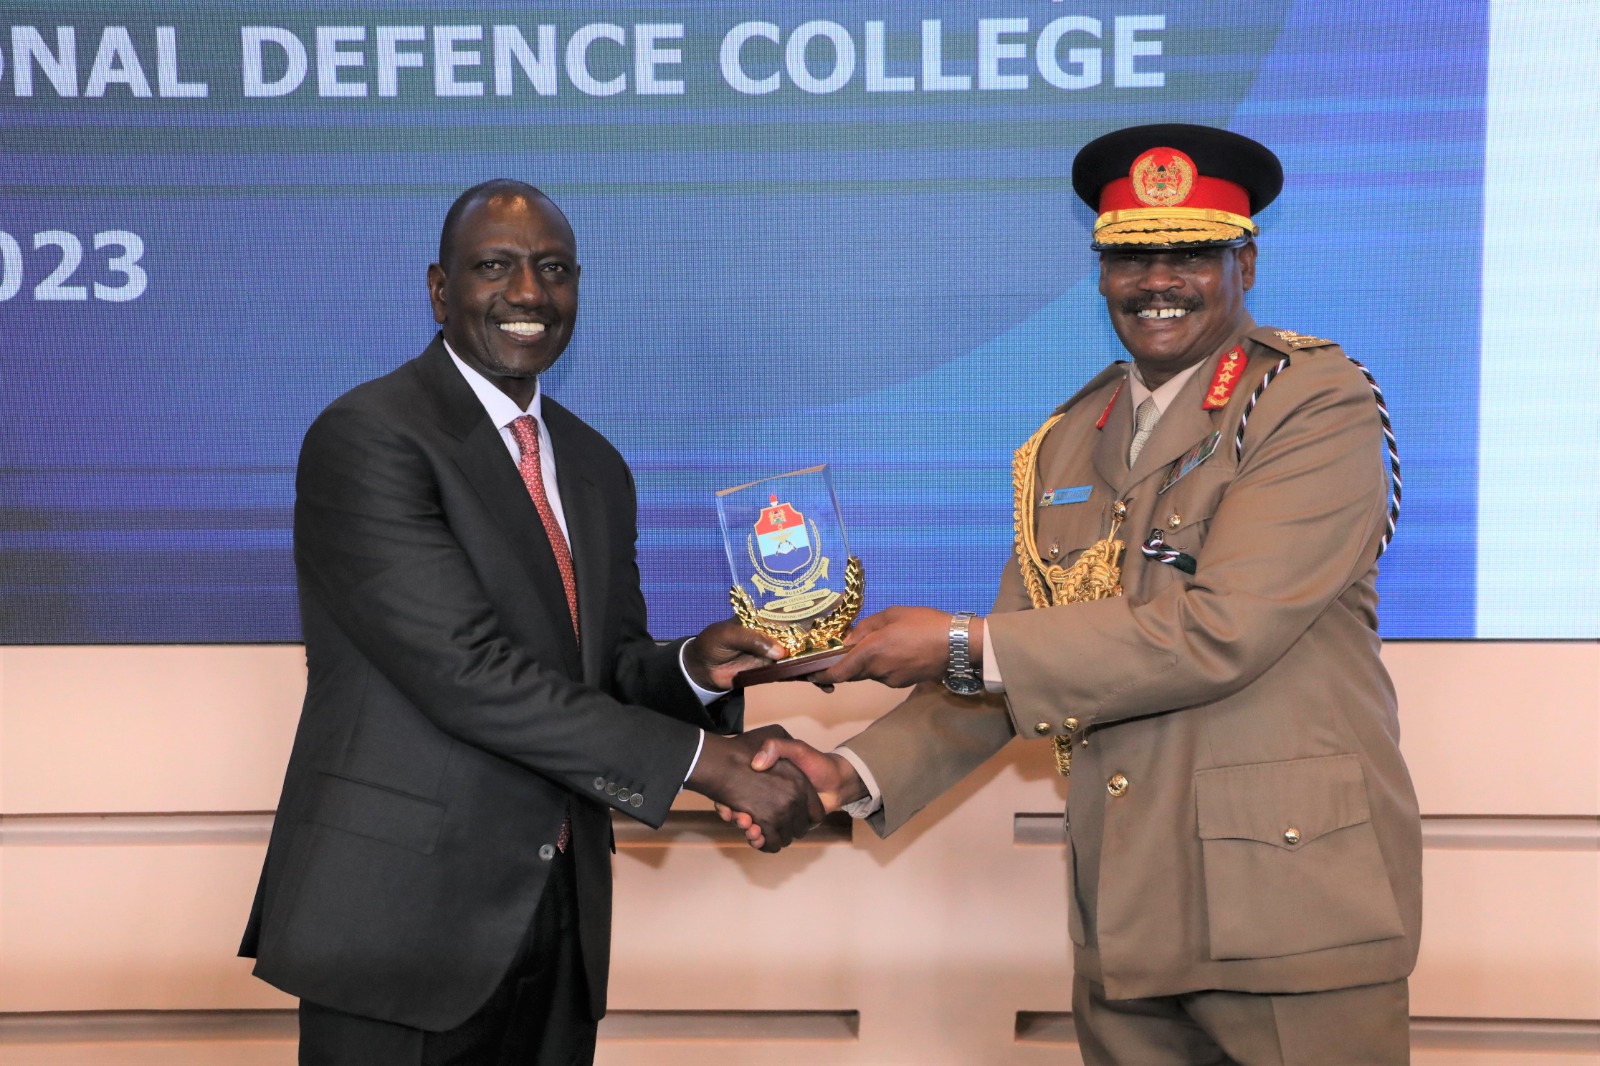 His Excellency Dr. William Ruto receives a memento from the Commandant National defence College Lt Gen Albert  Kendagor  during the lecture